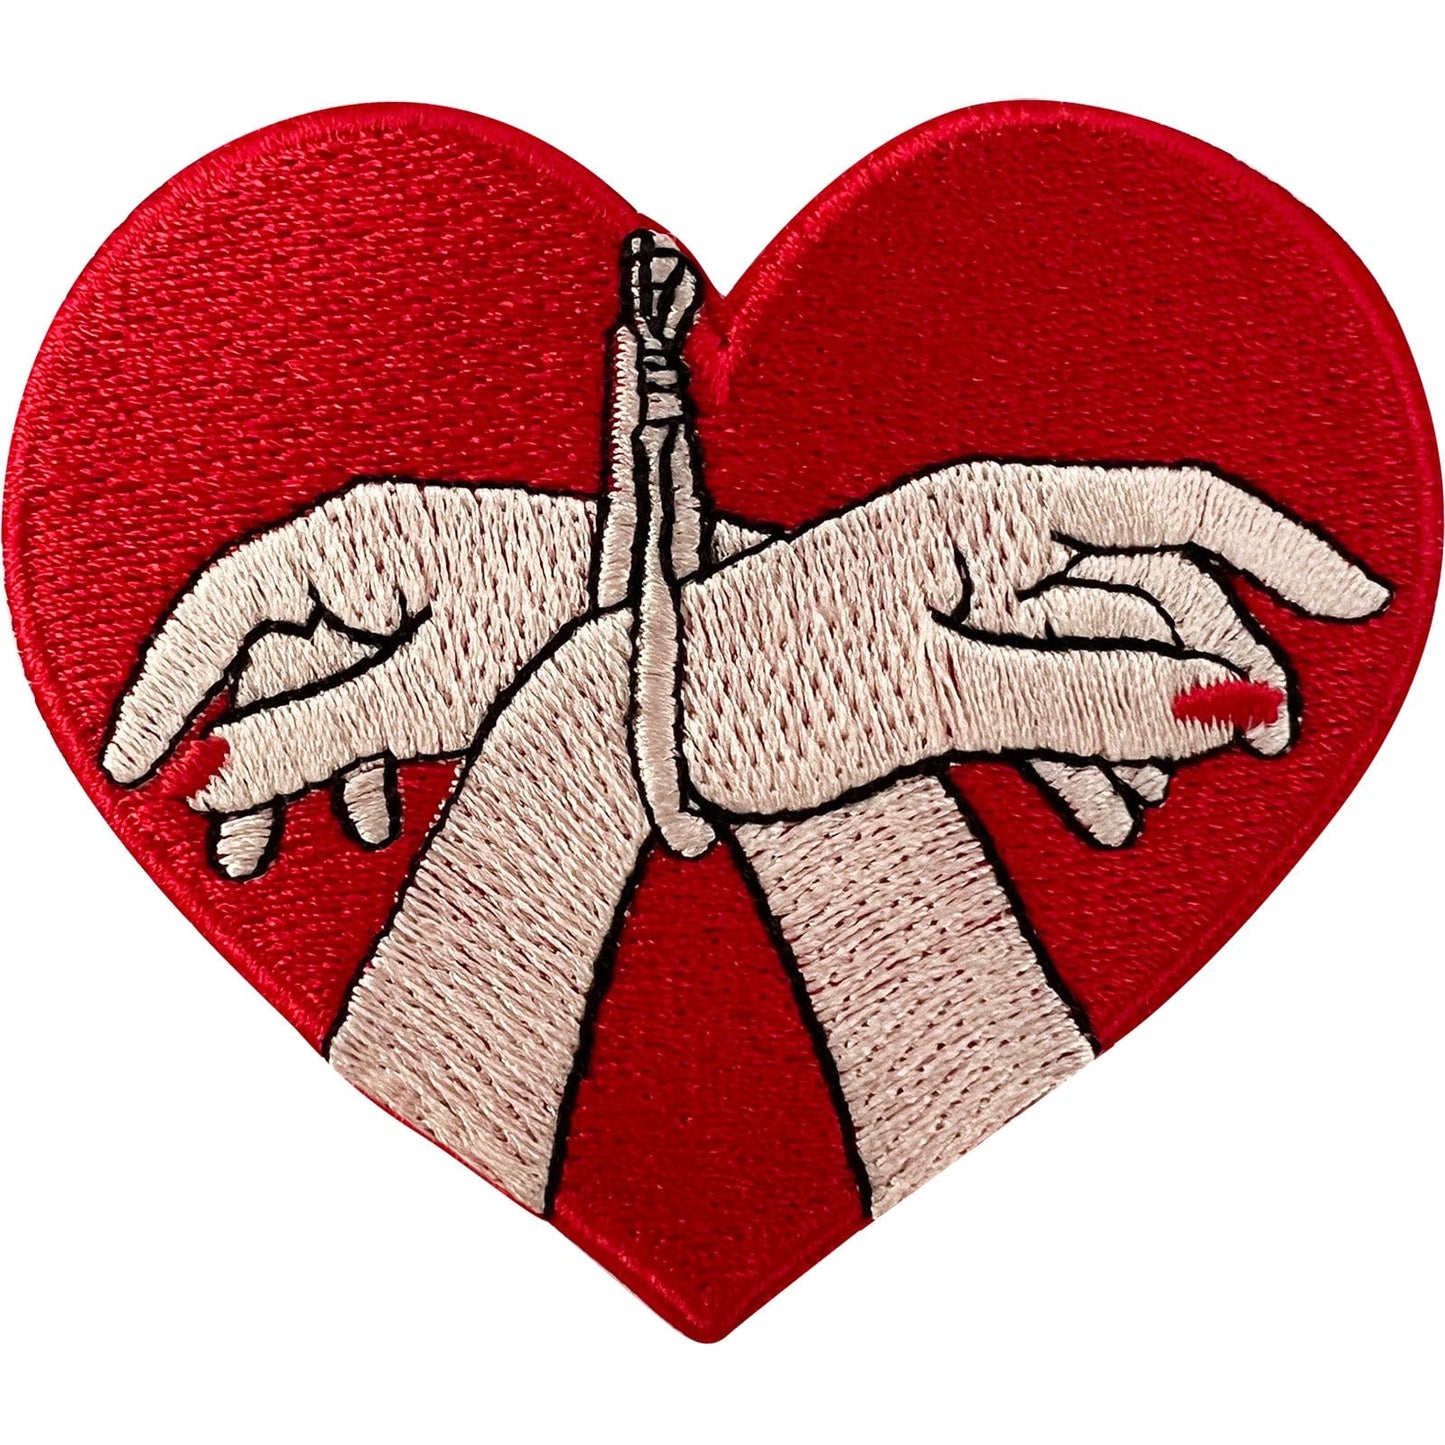 Red Love Heart Patch Iron Sew On Clothes Bondage BDSM Sex Cuff Embroidered Badge